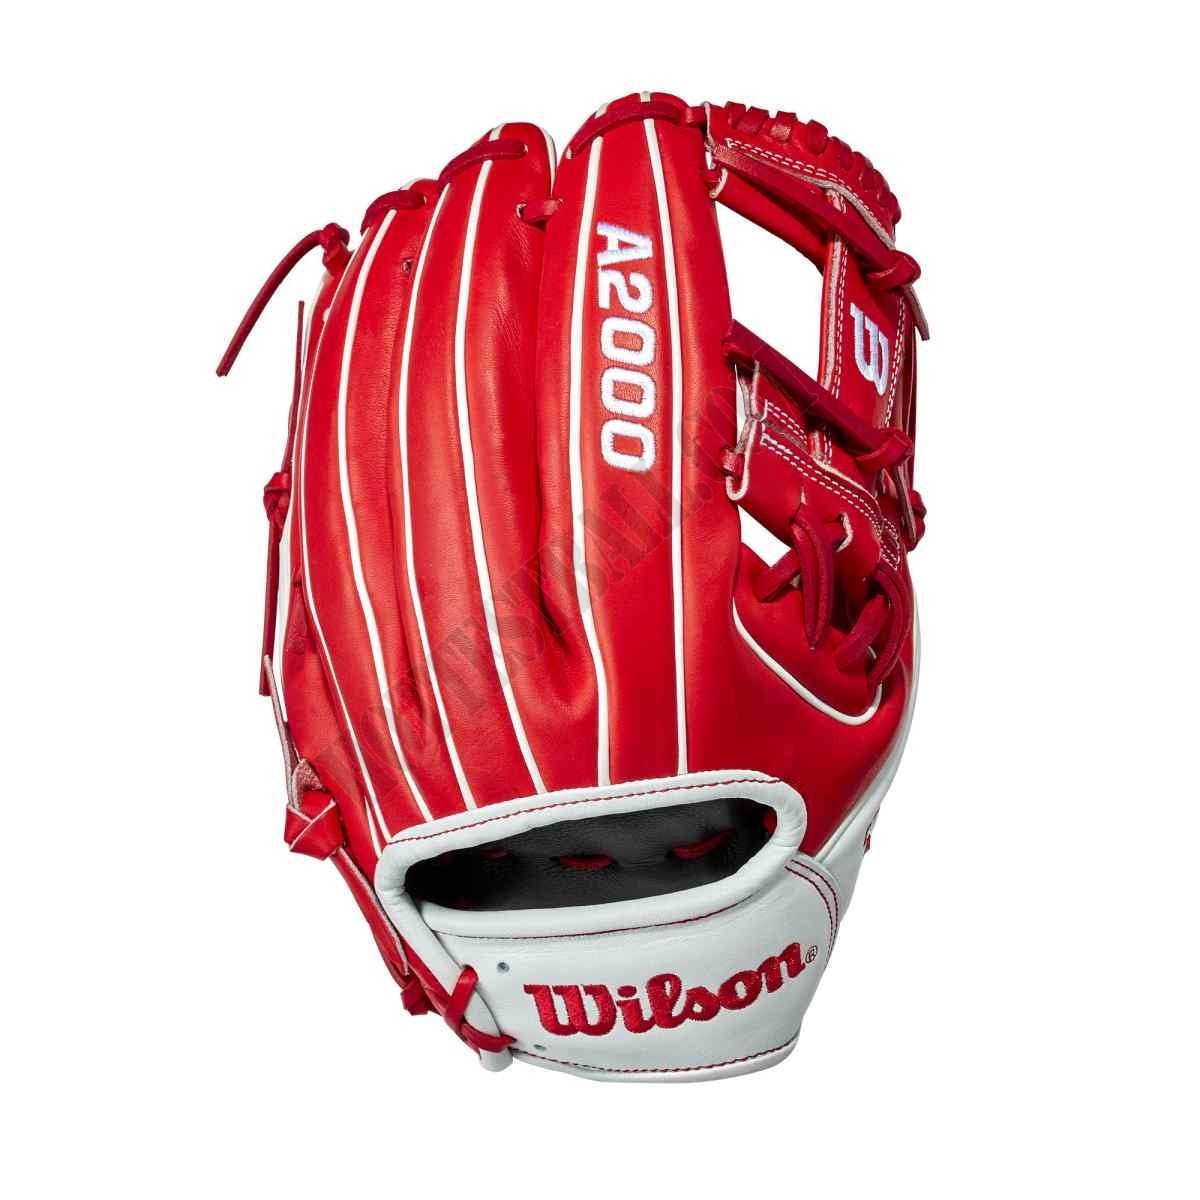 2021 A2000 1786 Canada 11.5" Infield Baseball Glove - Limited Edition ● Wilson Promotions - -1